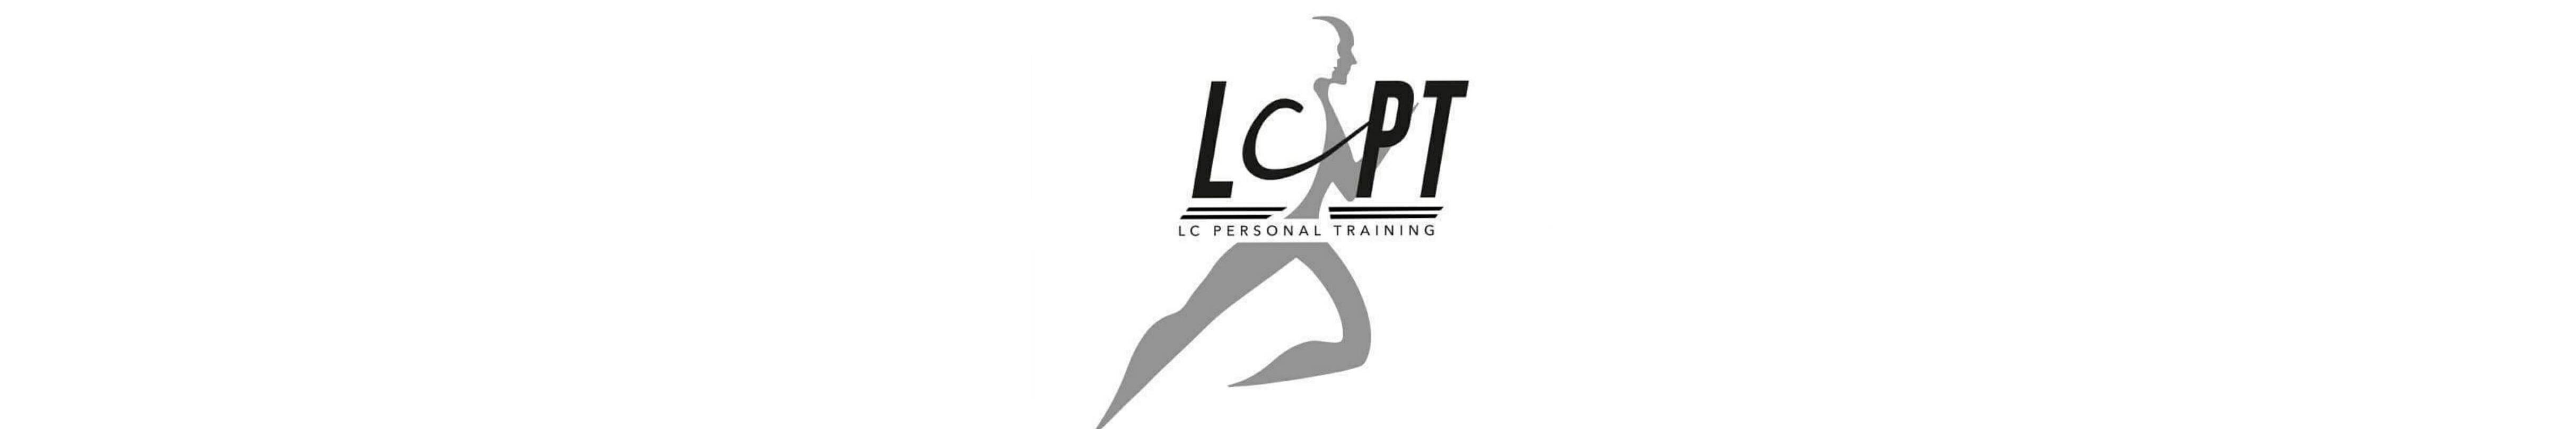 1-2-1 Personal Training. Physique Gym Gibraltar